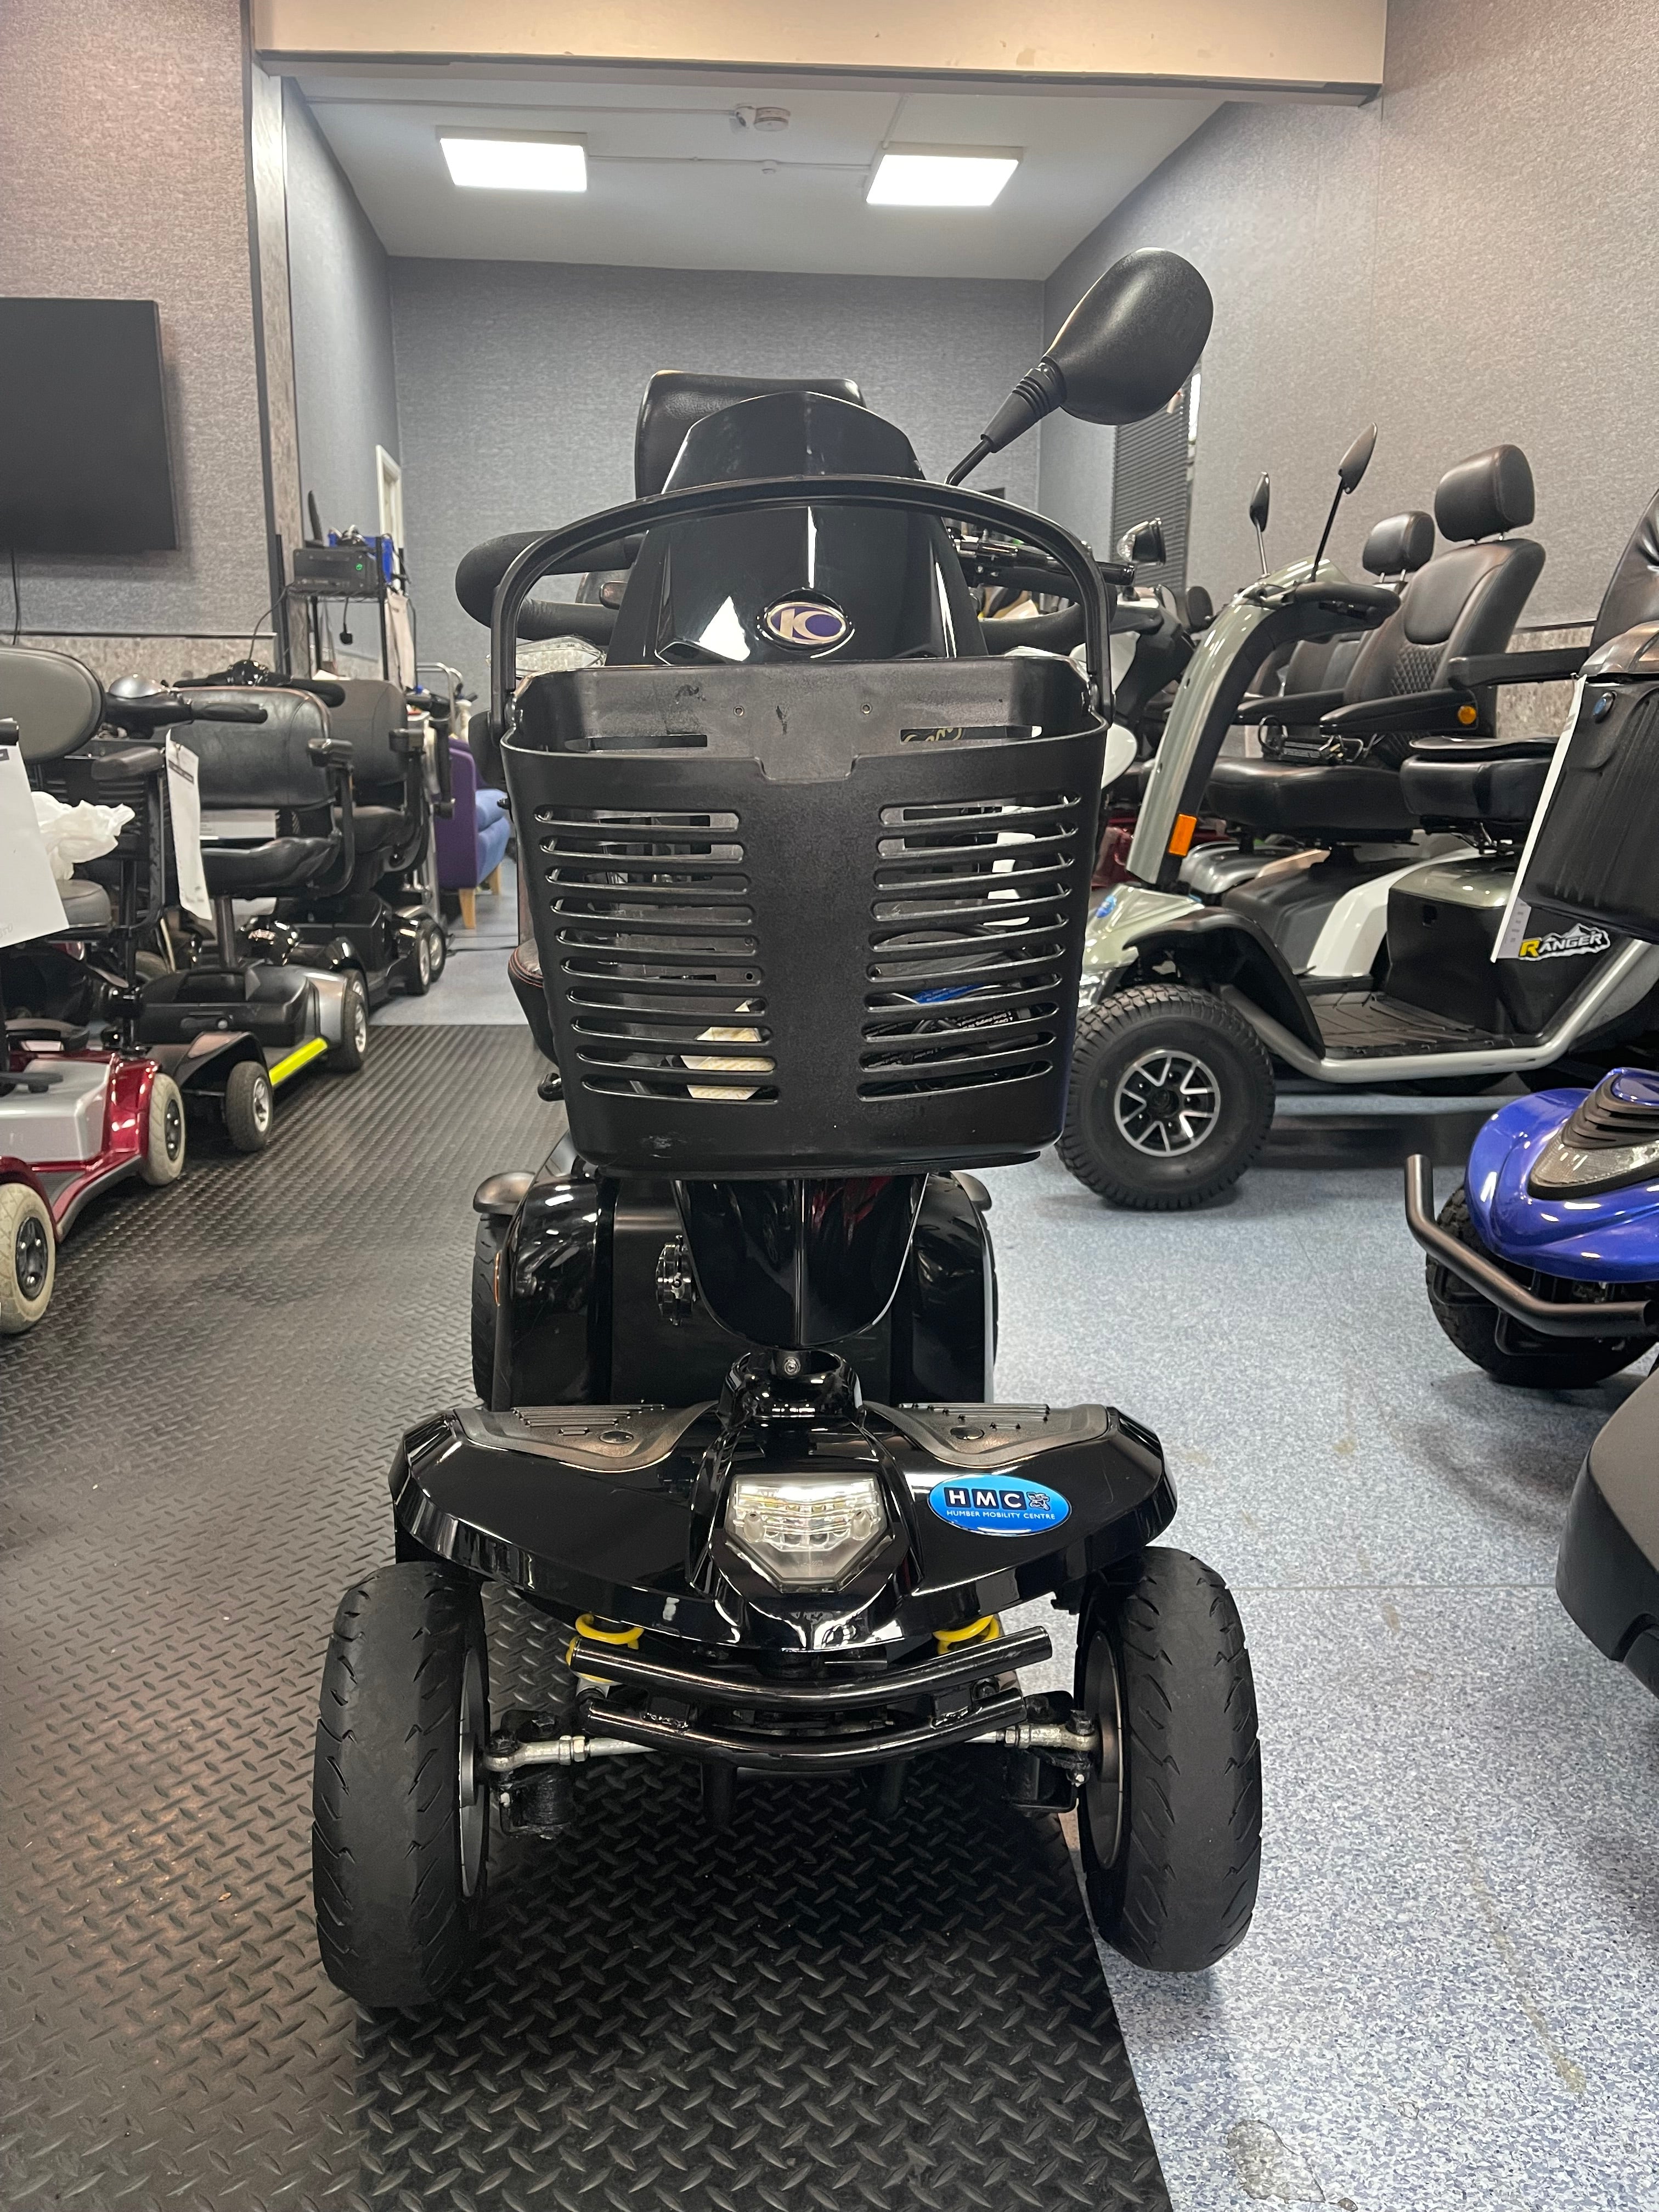 Kymco Komfy 8 Mobility Scooter